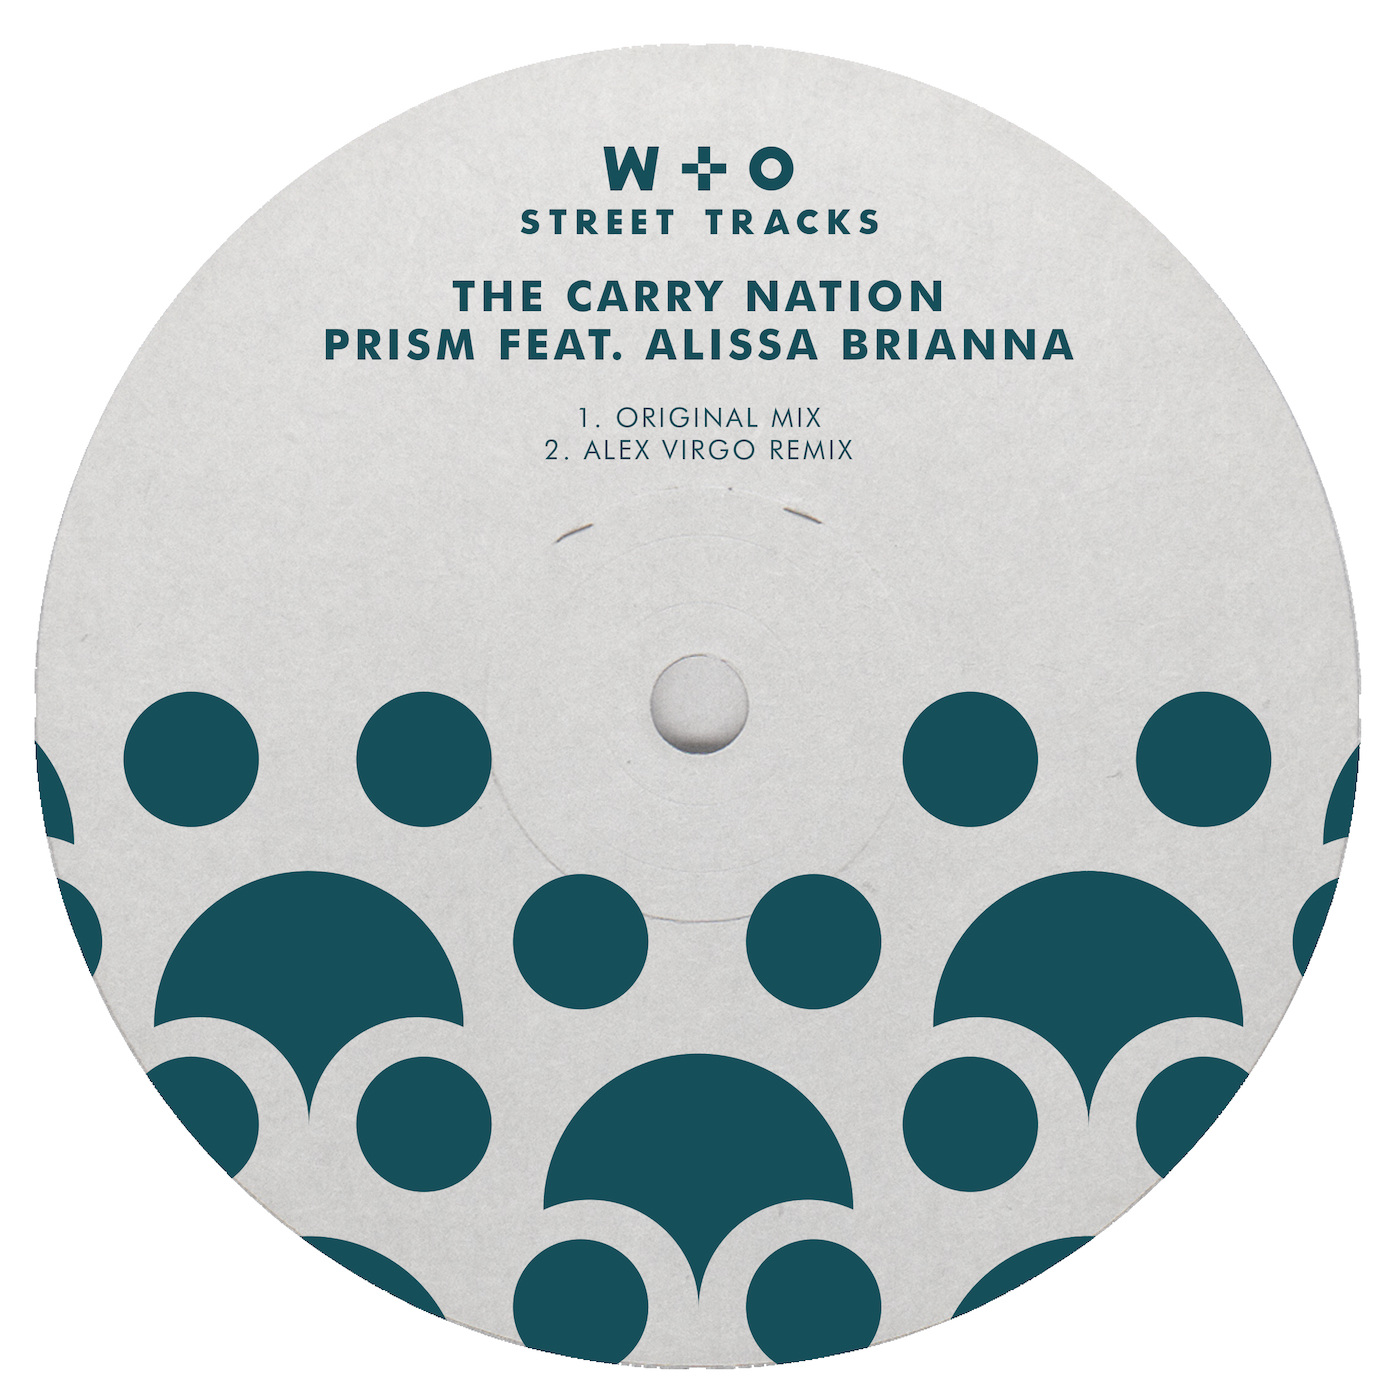 The Carry Nation - Prism feat. Alissa Brianna / W&O Street Tracks